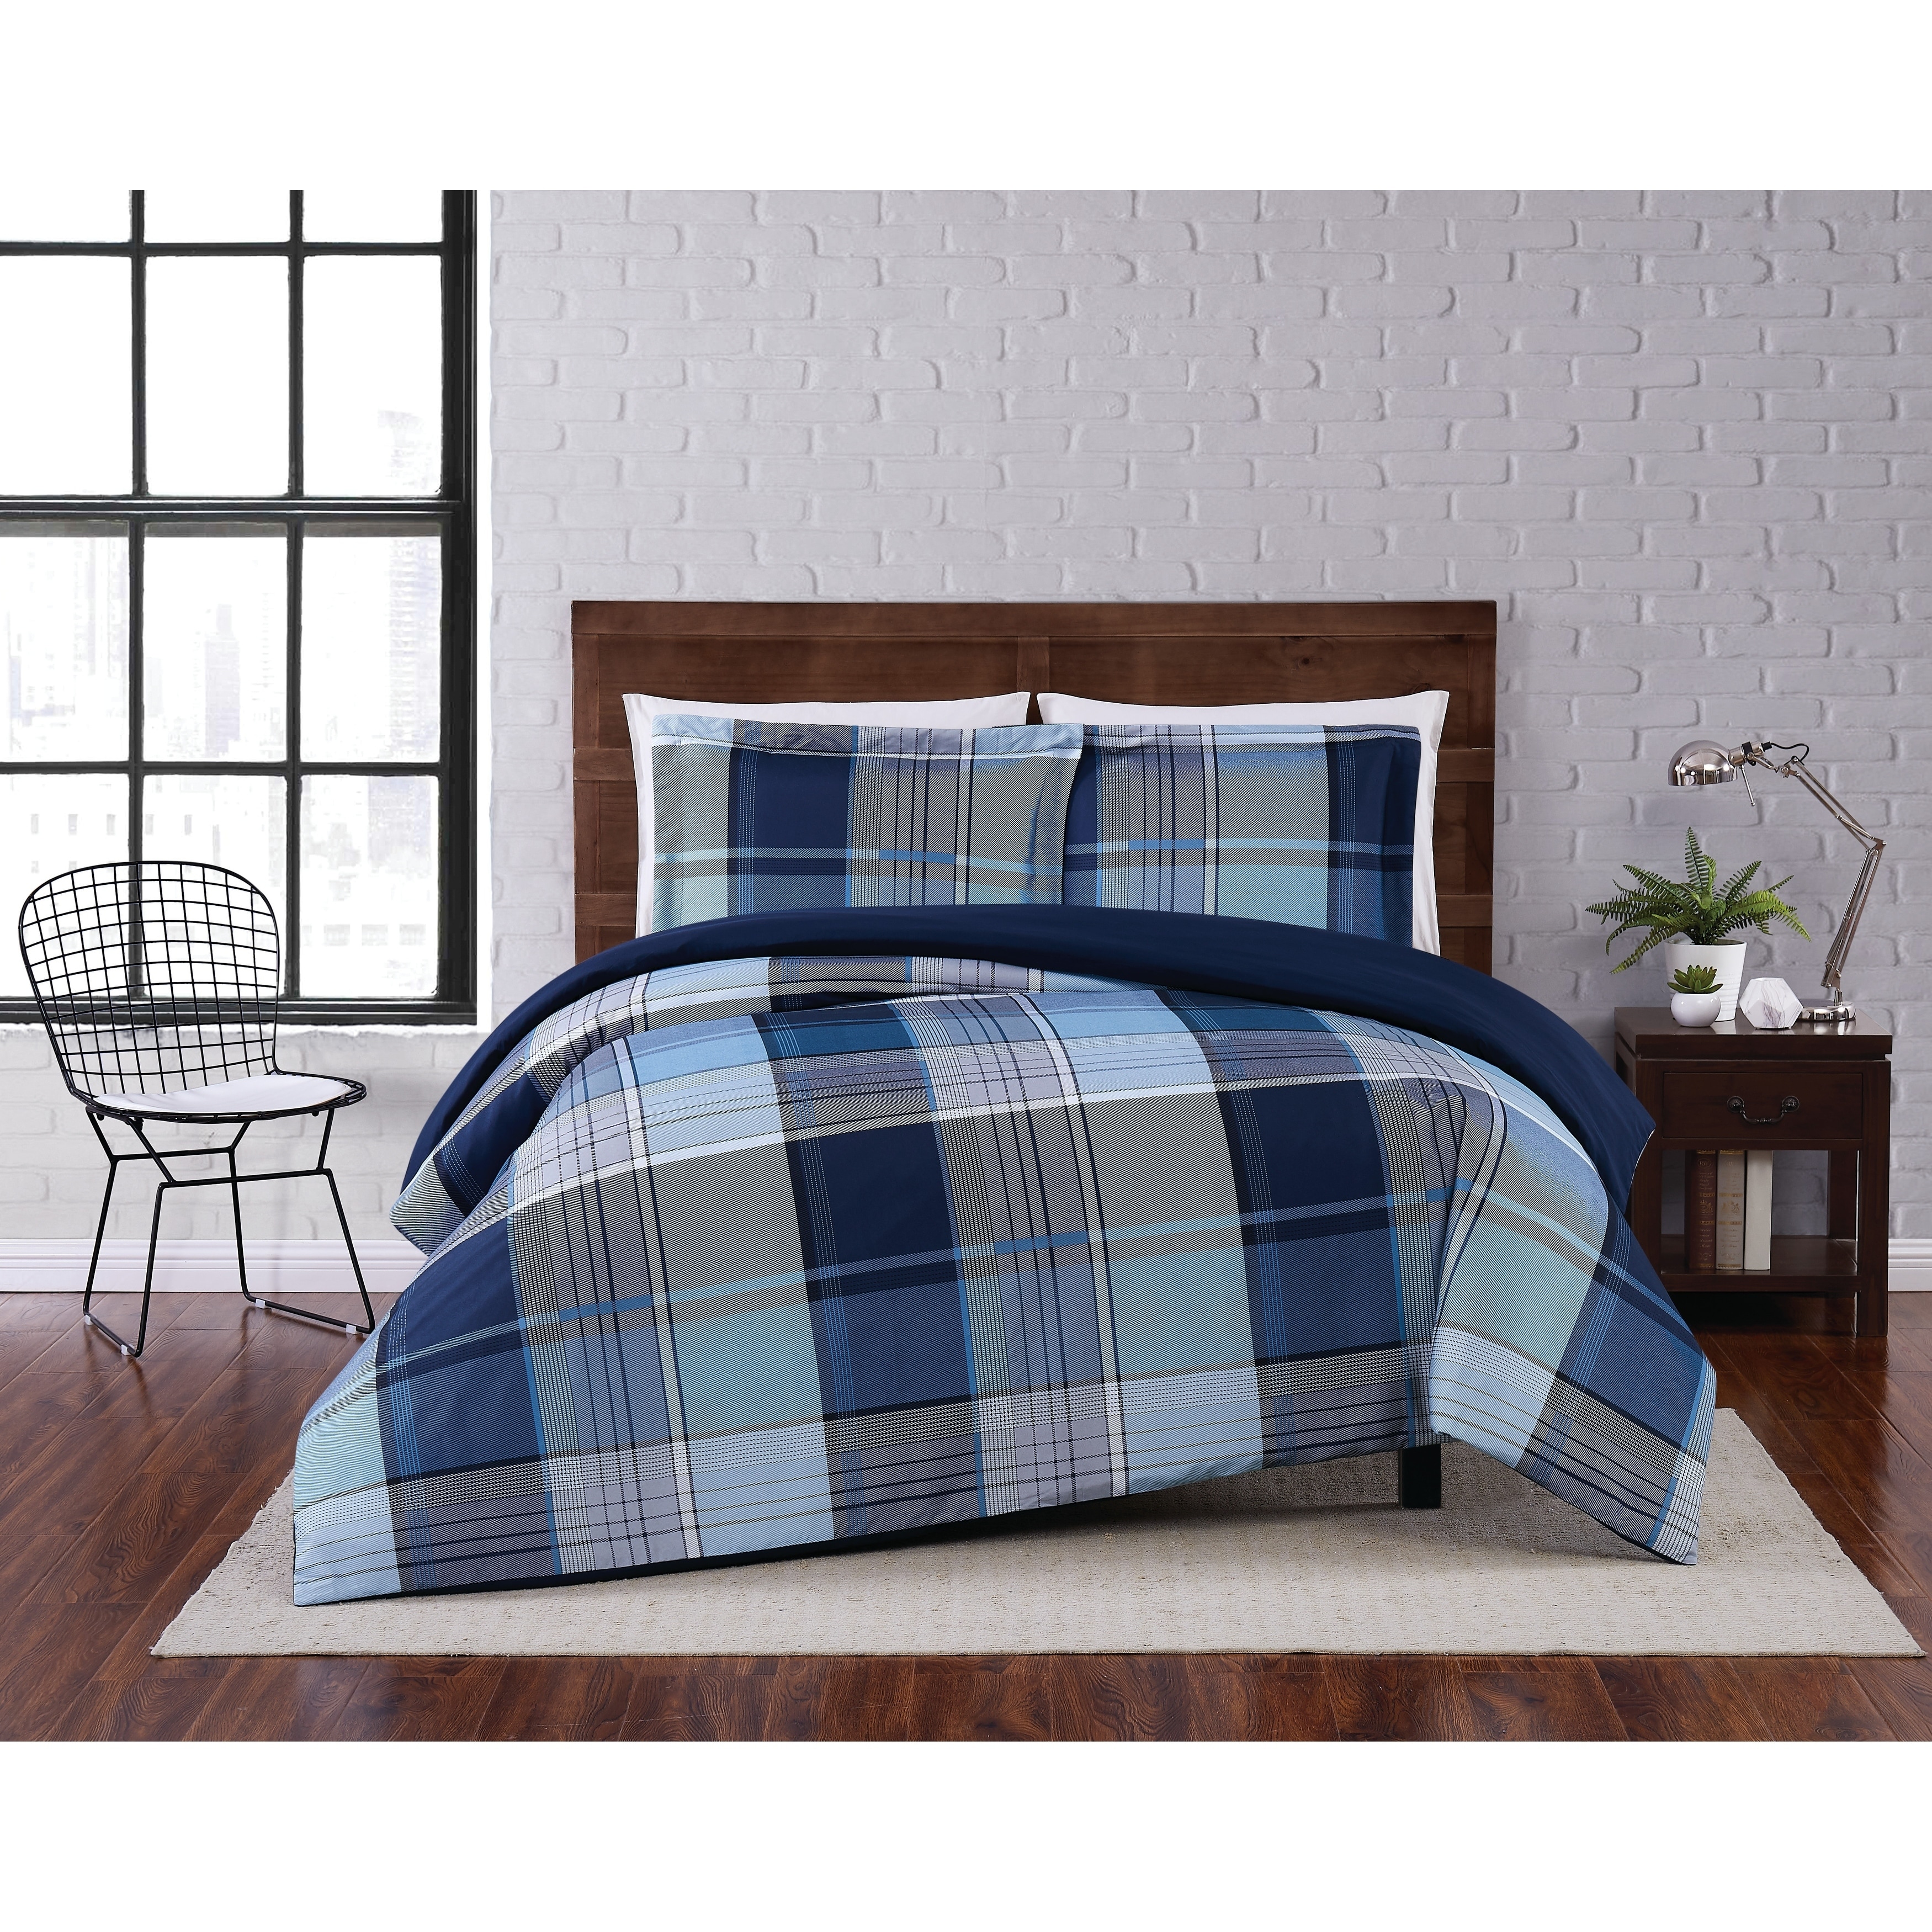 Fan Duvet Cover Set Queen Size Black and White Grid Checkered Plaid Pattern Boys Bedding Sets Reversible Modern Microfiber Comforter Cover and 2 Pillow Shams